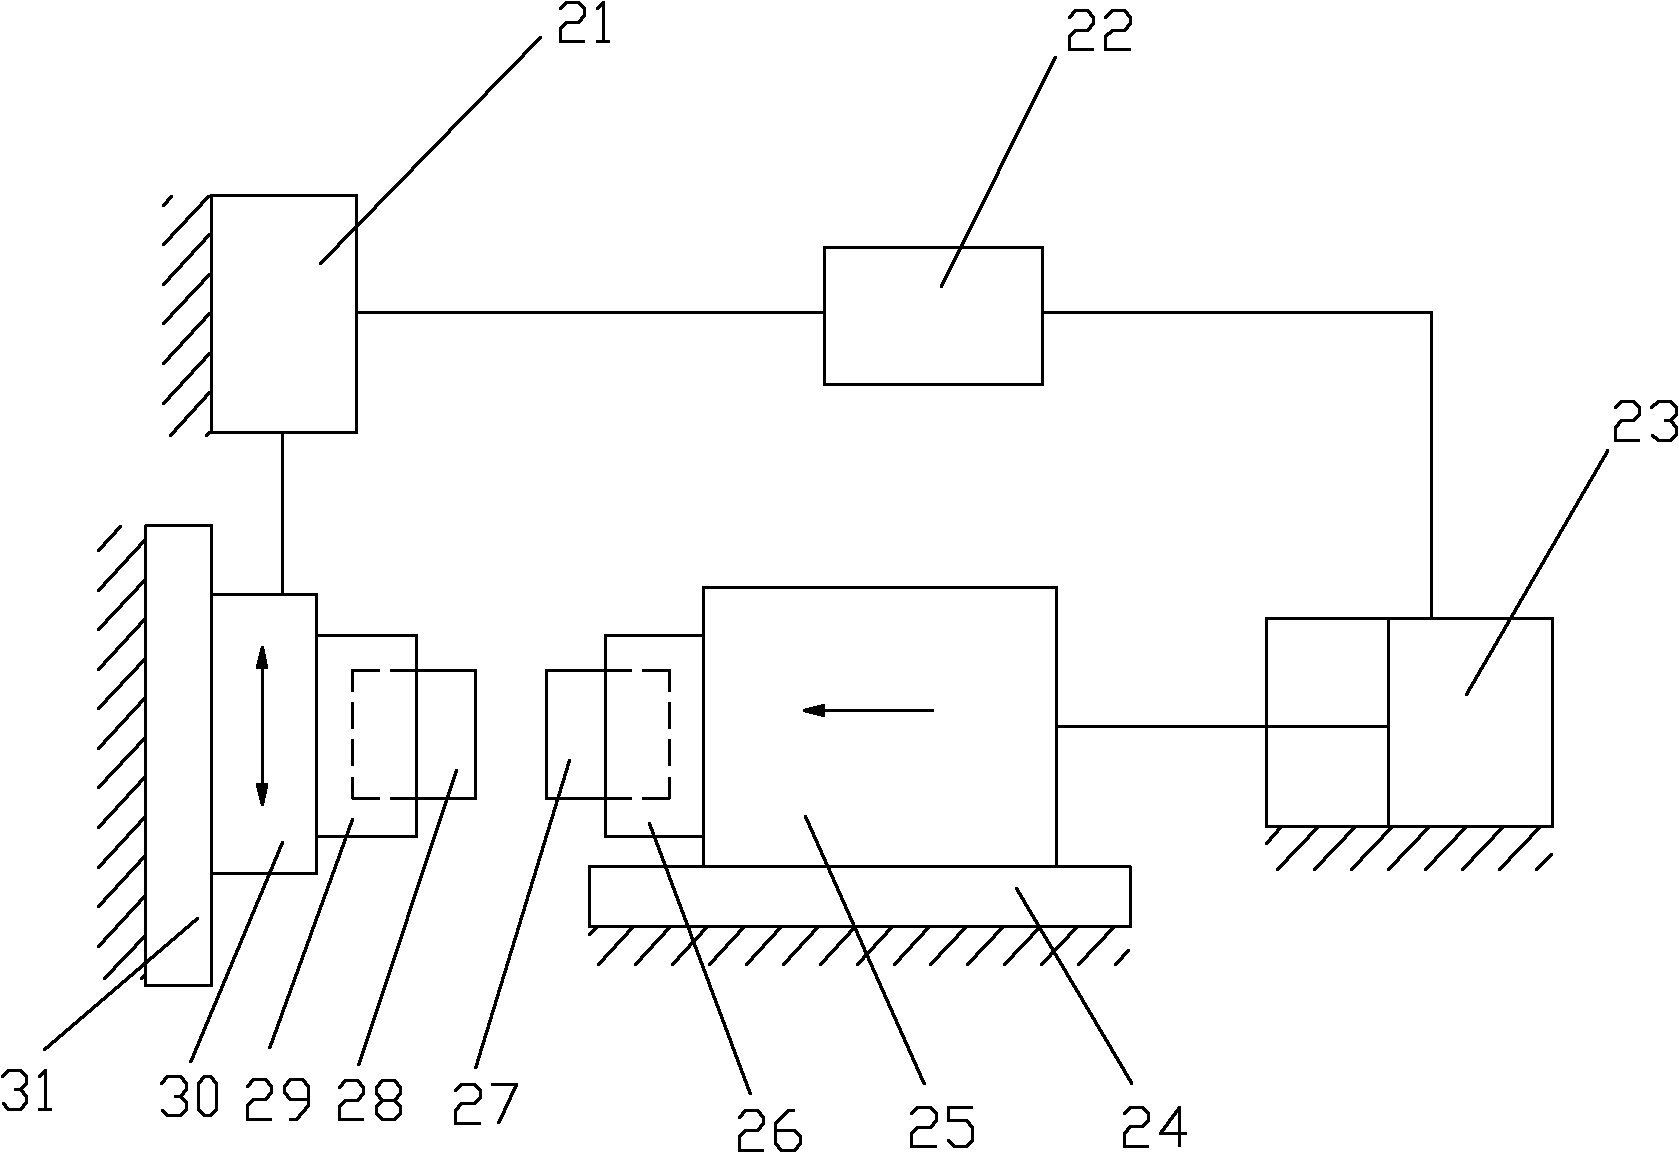 Current-loaded linear friction welding device